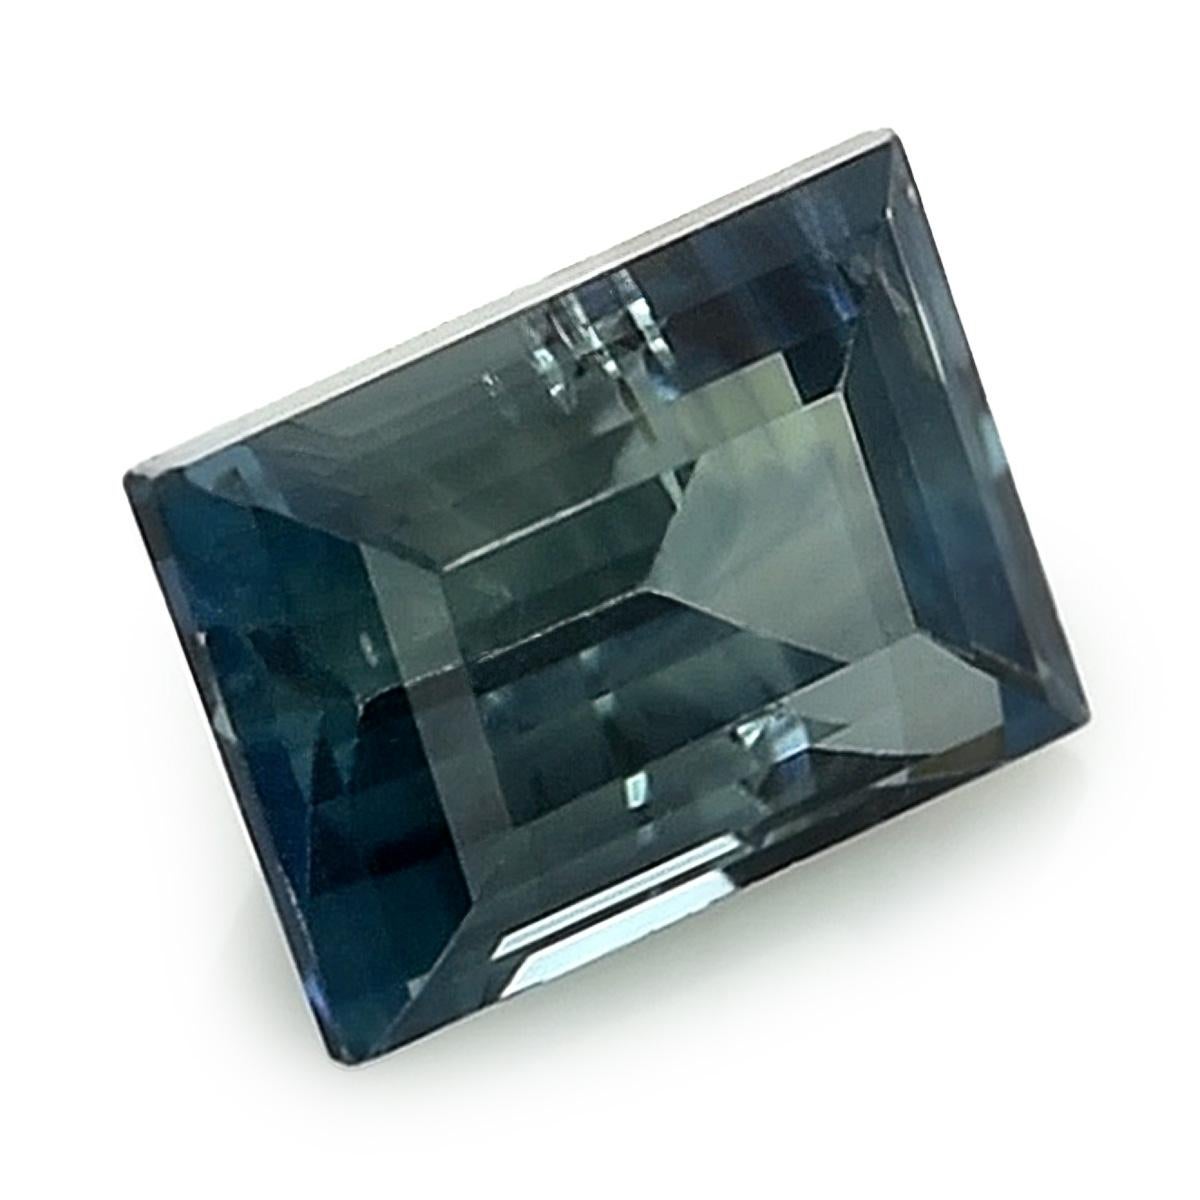 Introducing a Natural Green Blue Sapphire, graced with a weight of 1.20 carats. This enchanting gem assumes a Rectangle shape, showcasing precise measurements of 6.49 x 4.51 x 3.82 mm. Its brilliance is heightened by the Brilliant/Step cut,